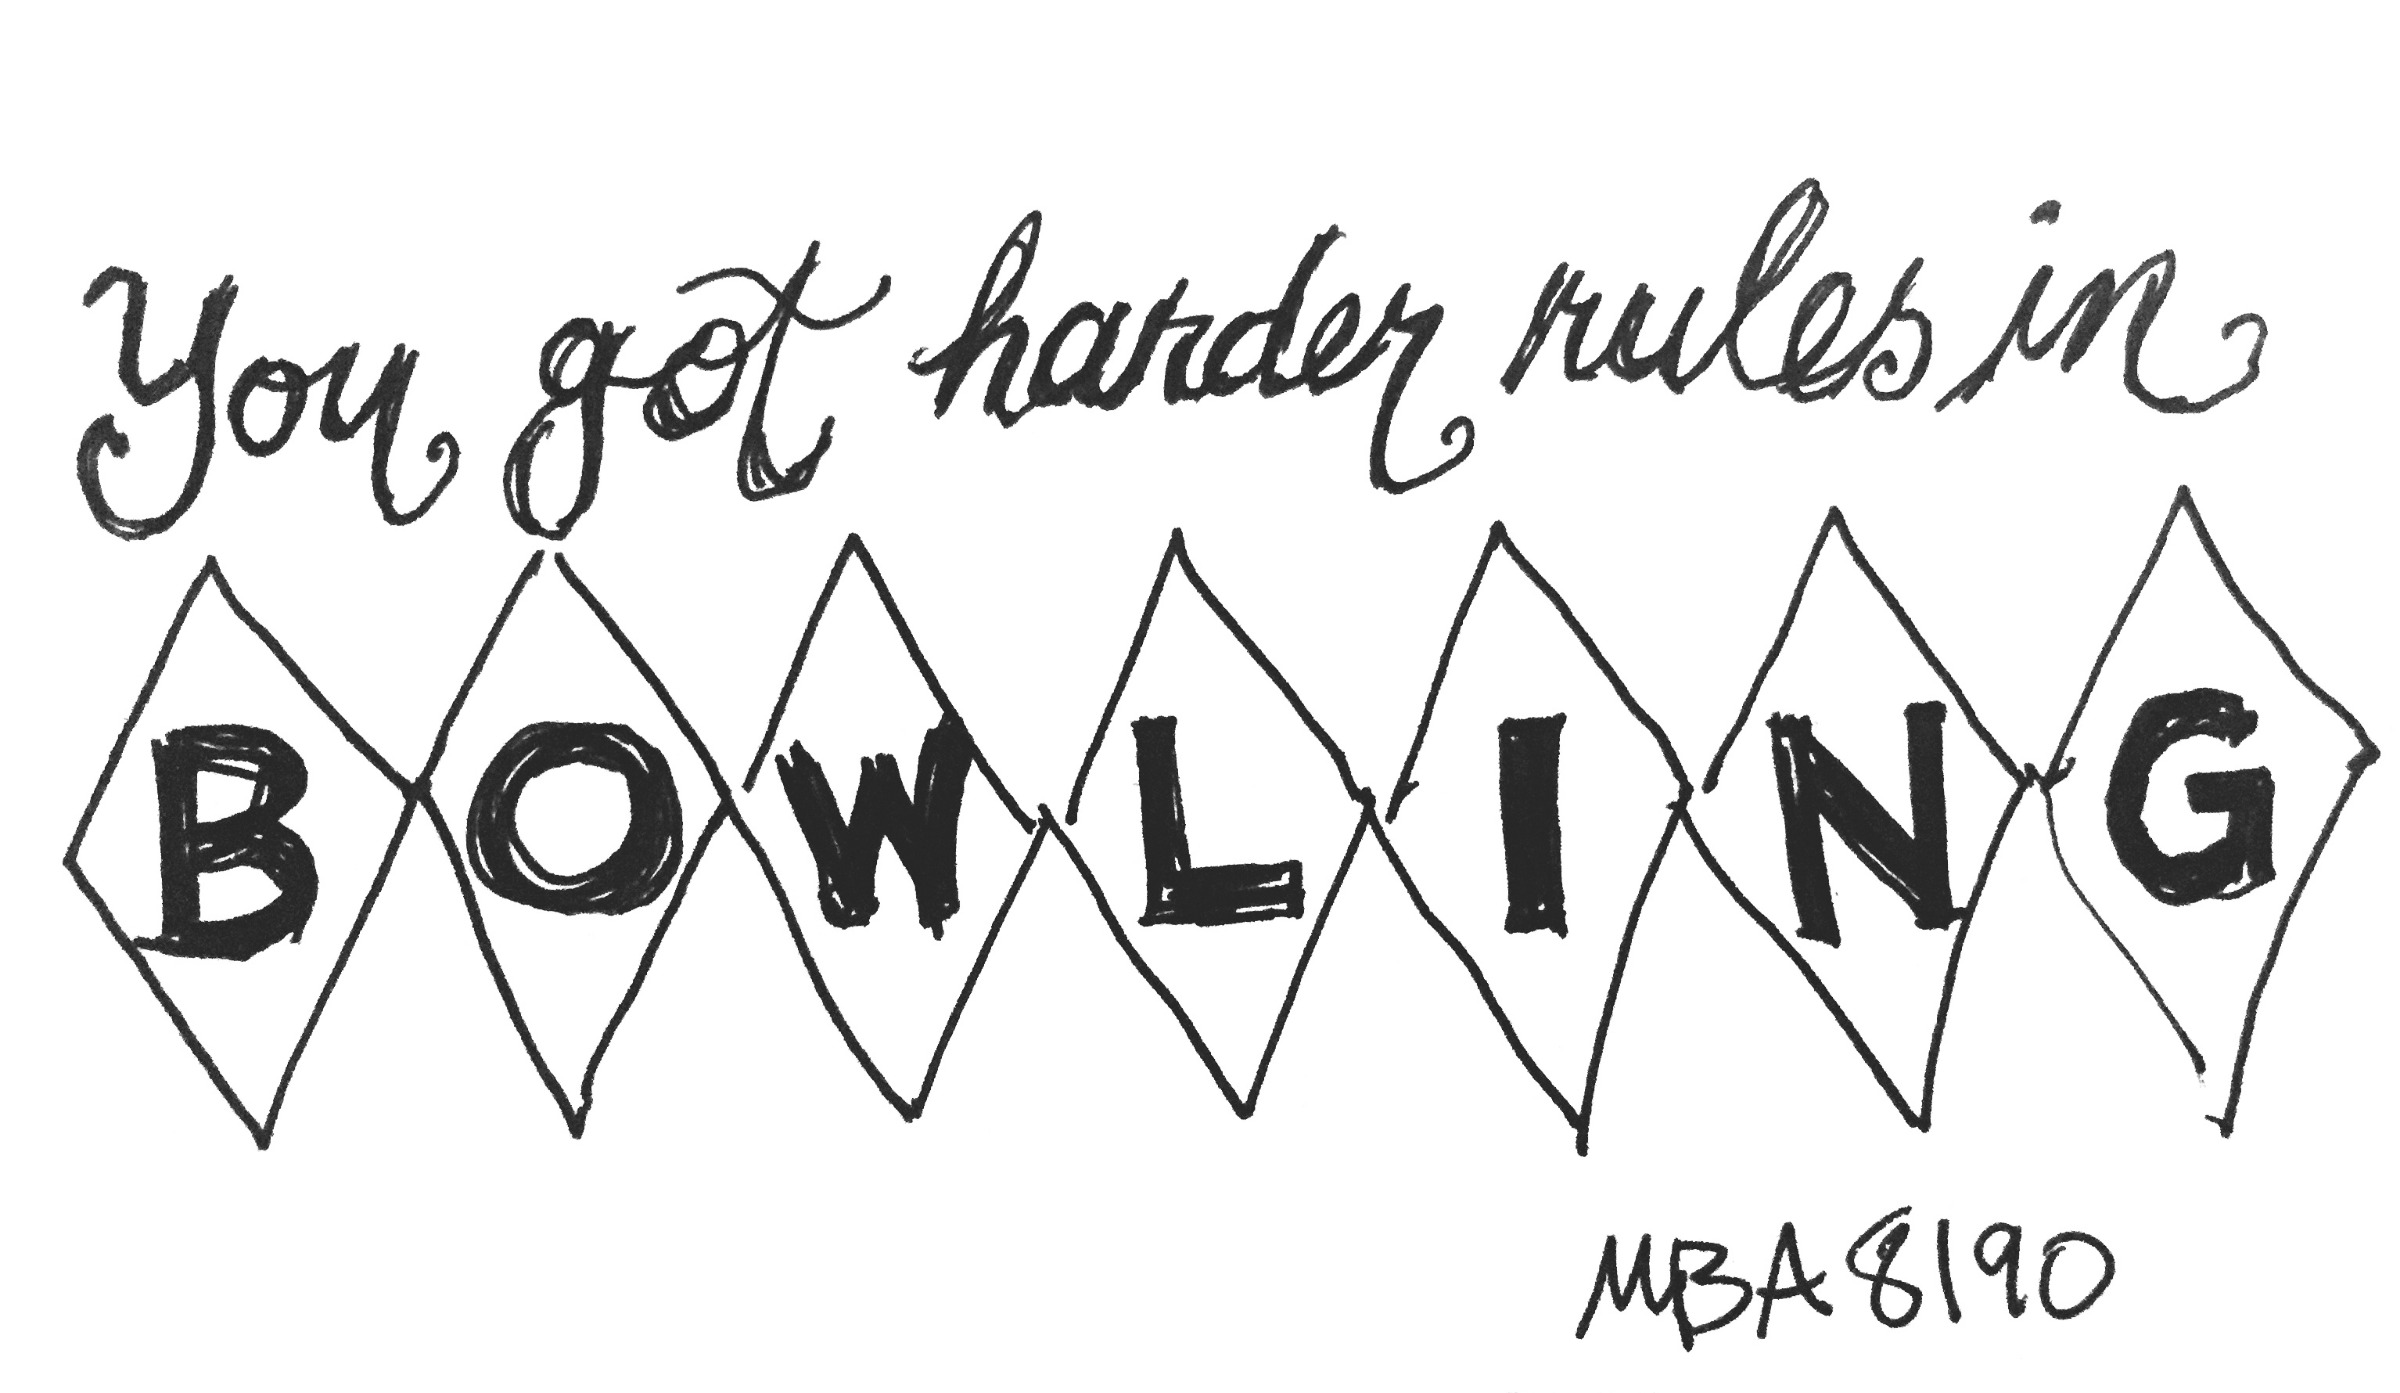 YOU’VE GOT HARDER RULES IN BOWLING